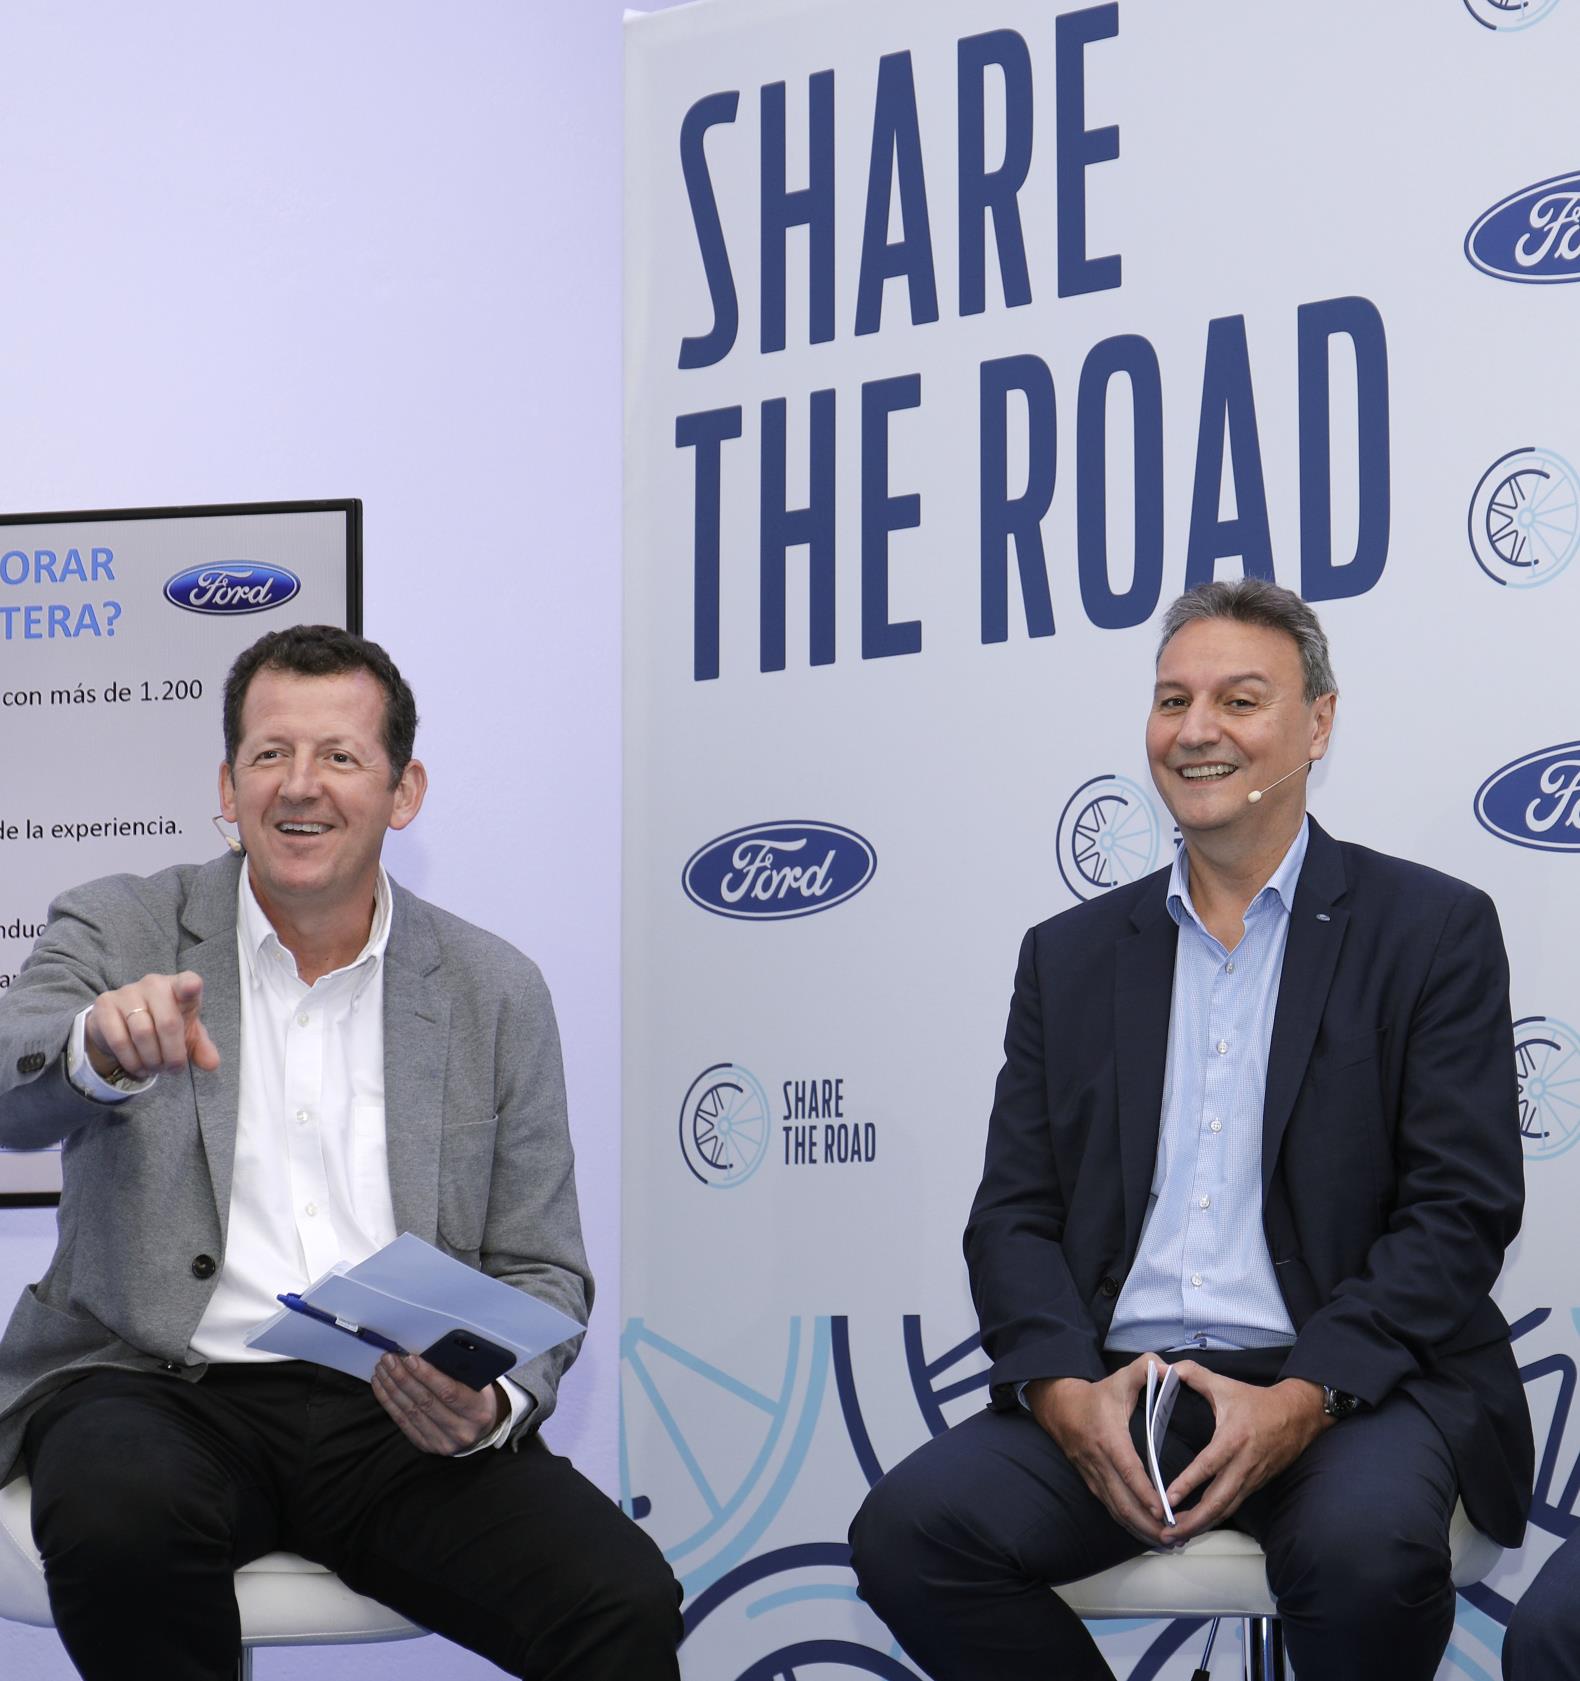 Share the Road by Ford